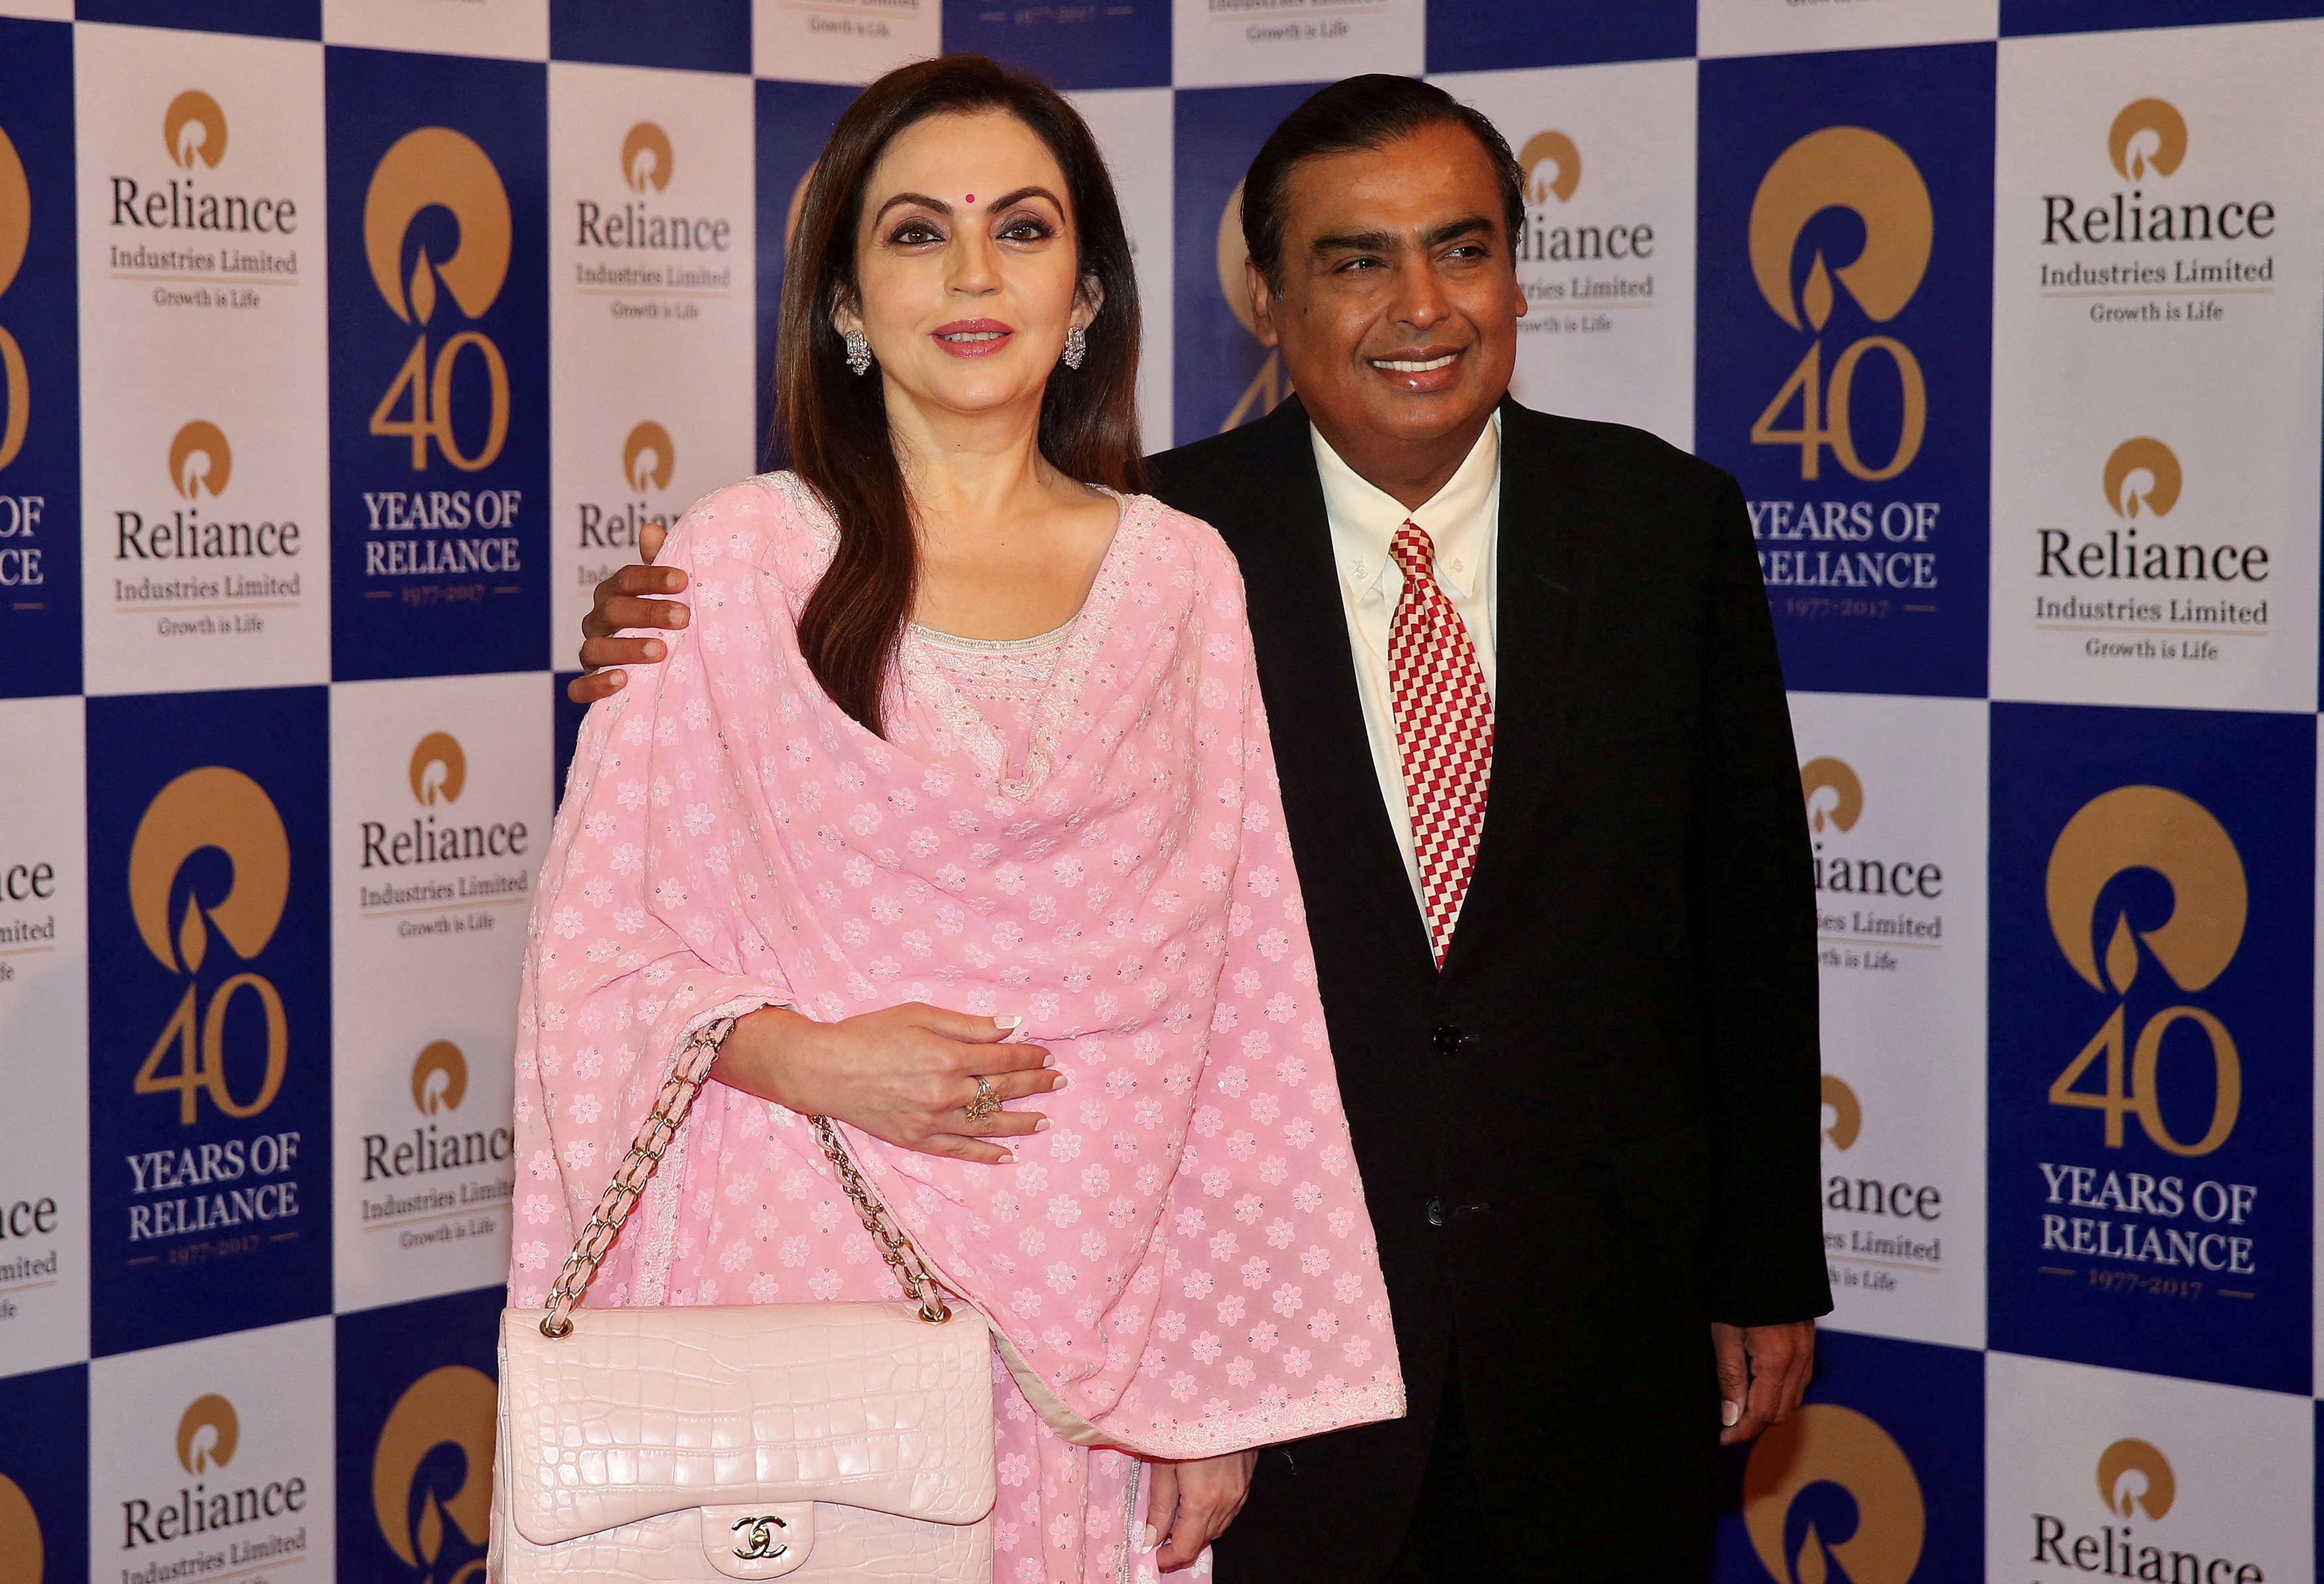 Mukesh Ambani, Chairman and Managing Director of Reliance Industries, poses with wife Nita Ambani before addressing the company’s annual general meeting in Mumbai, India 21 July 2017